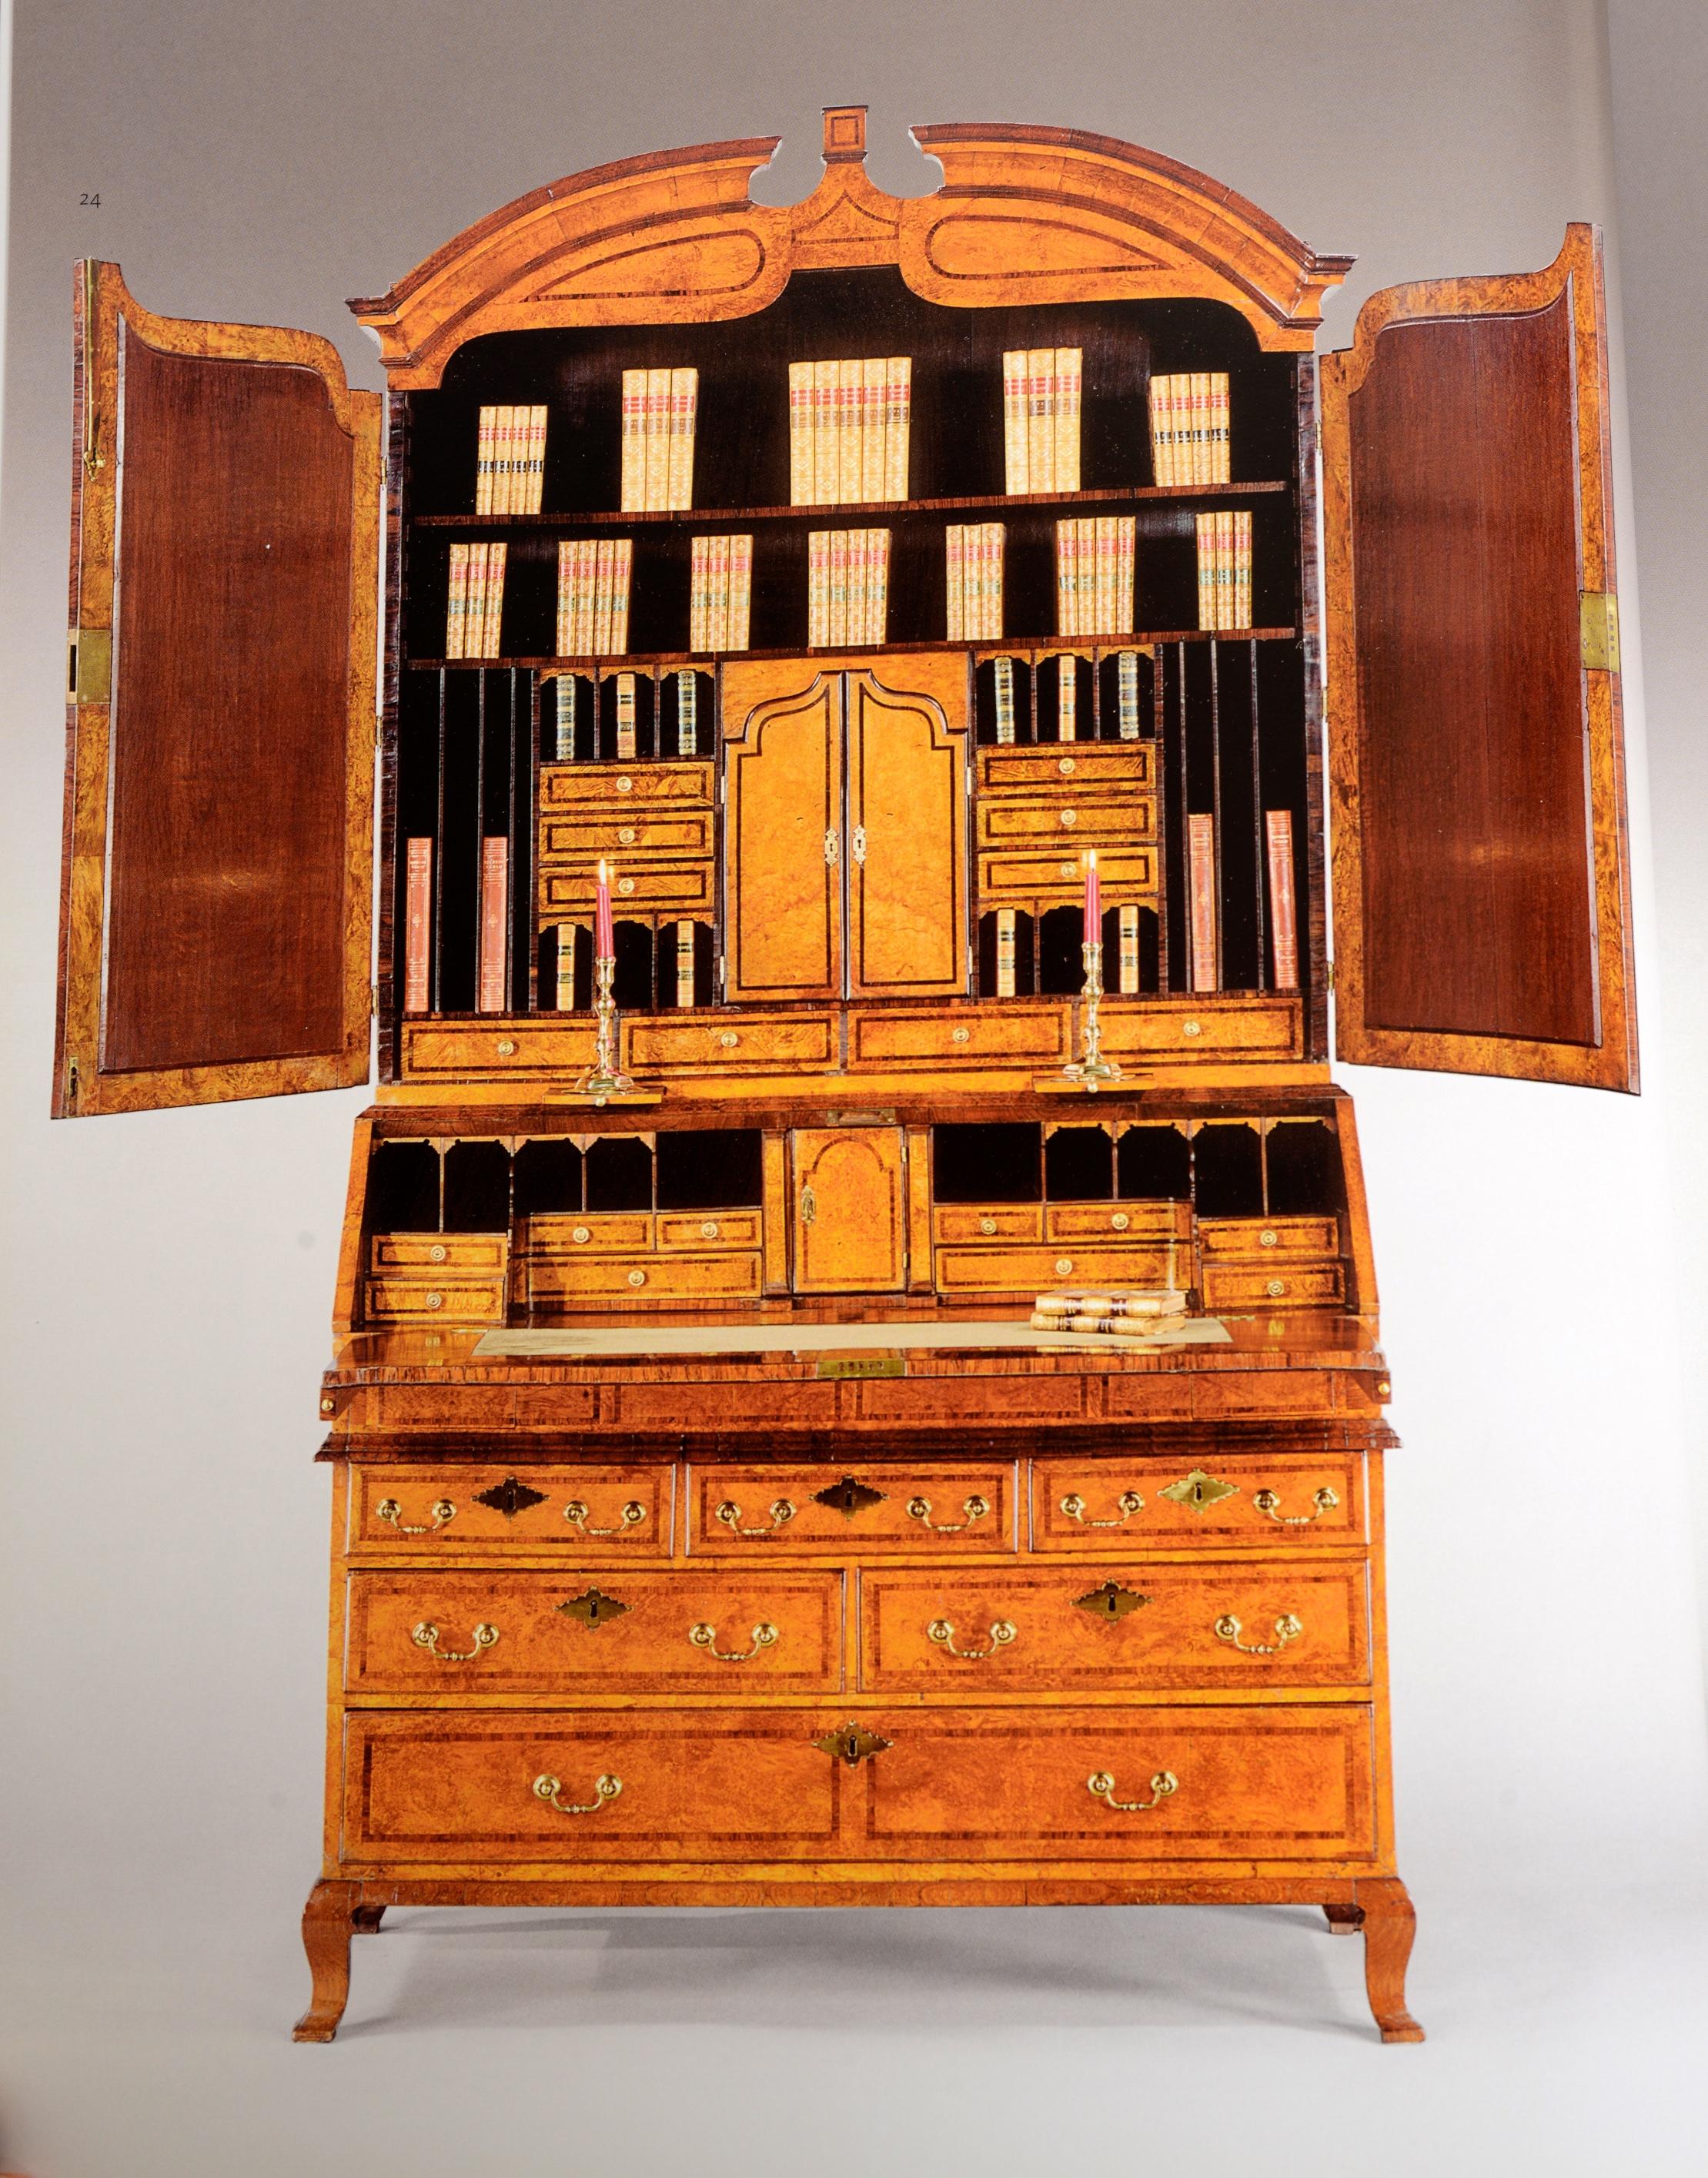 Contemporary Exceptional Furniture & Works of Art by Mallett & Son Antiques, First Edition For Sale